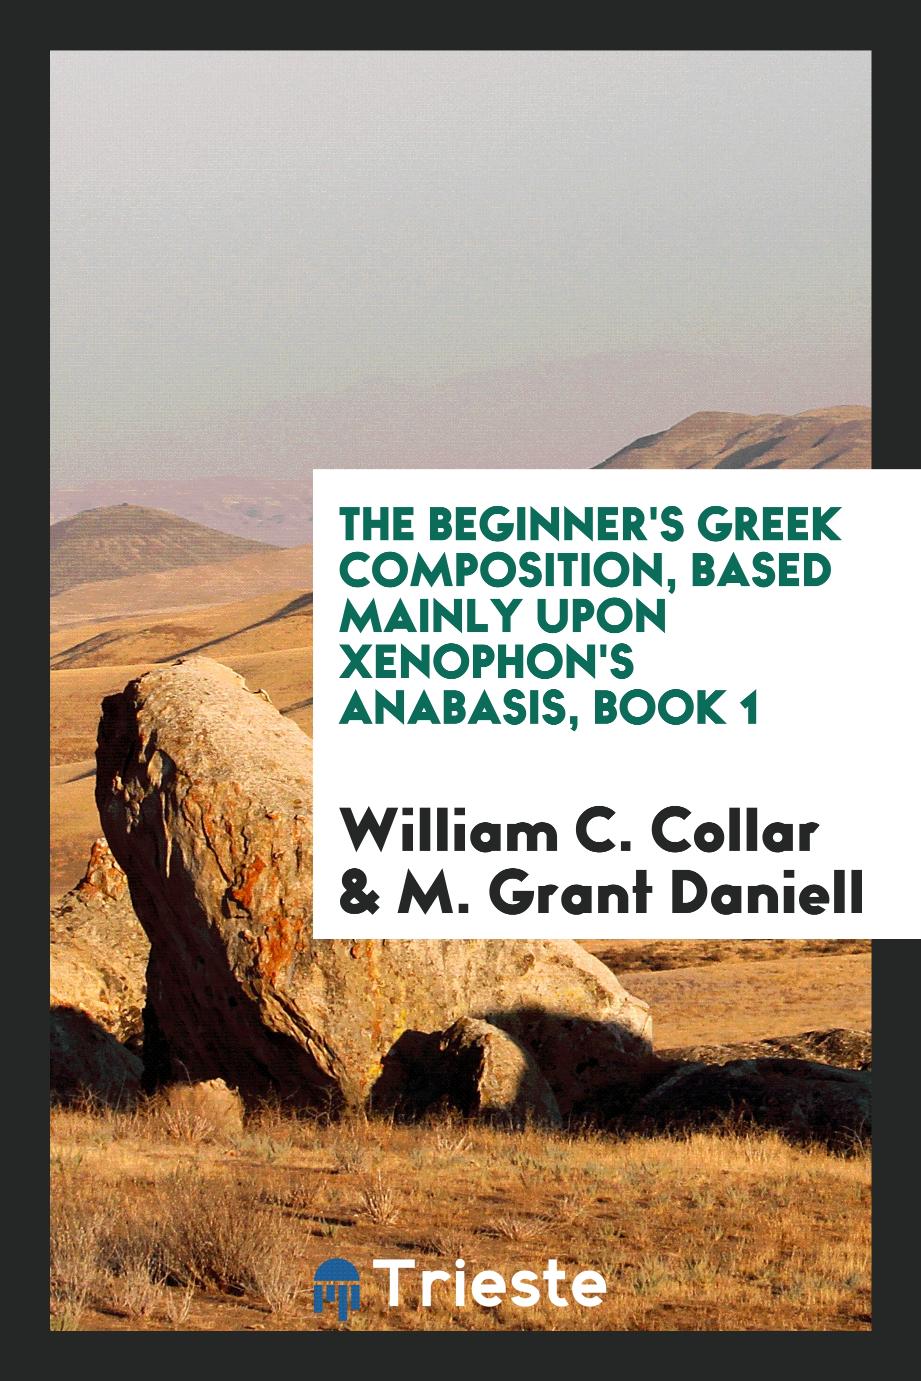 The beginner's Greek composition, based mainly upon Xenophon's Anabasis, Book 1